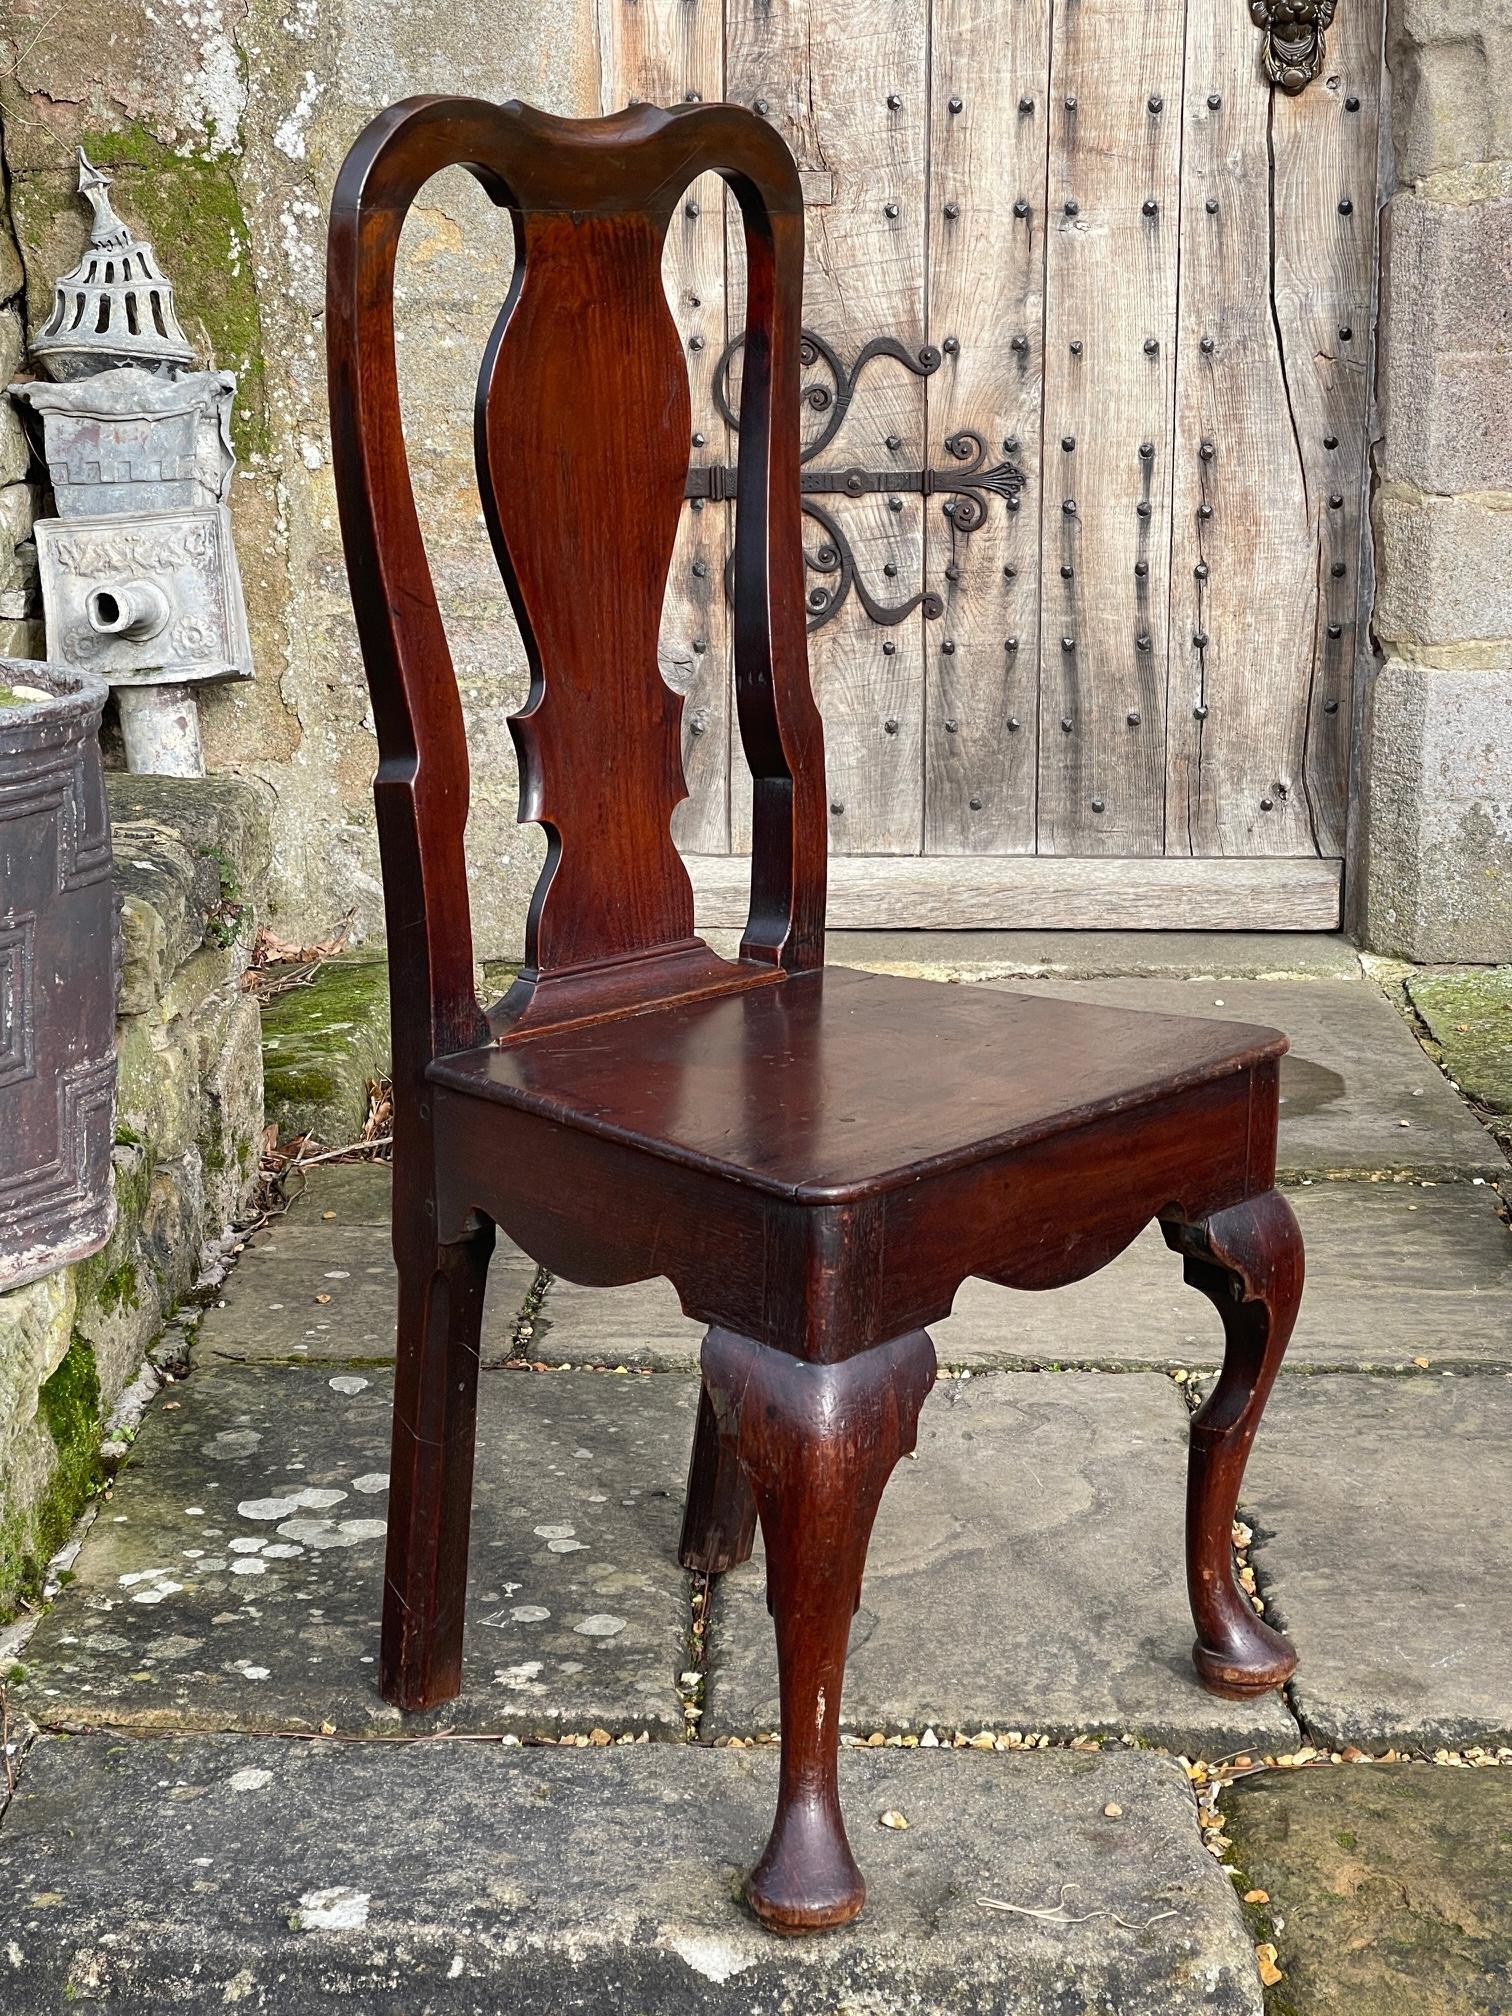 Good quality queen Anne period single chair c1720

good shaped legs and seat rails rich colour and patination

Size  101 cms high

49cms wide

seat 44 cms